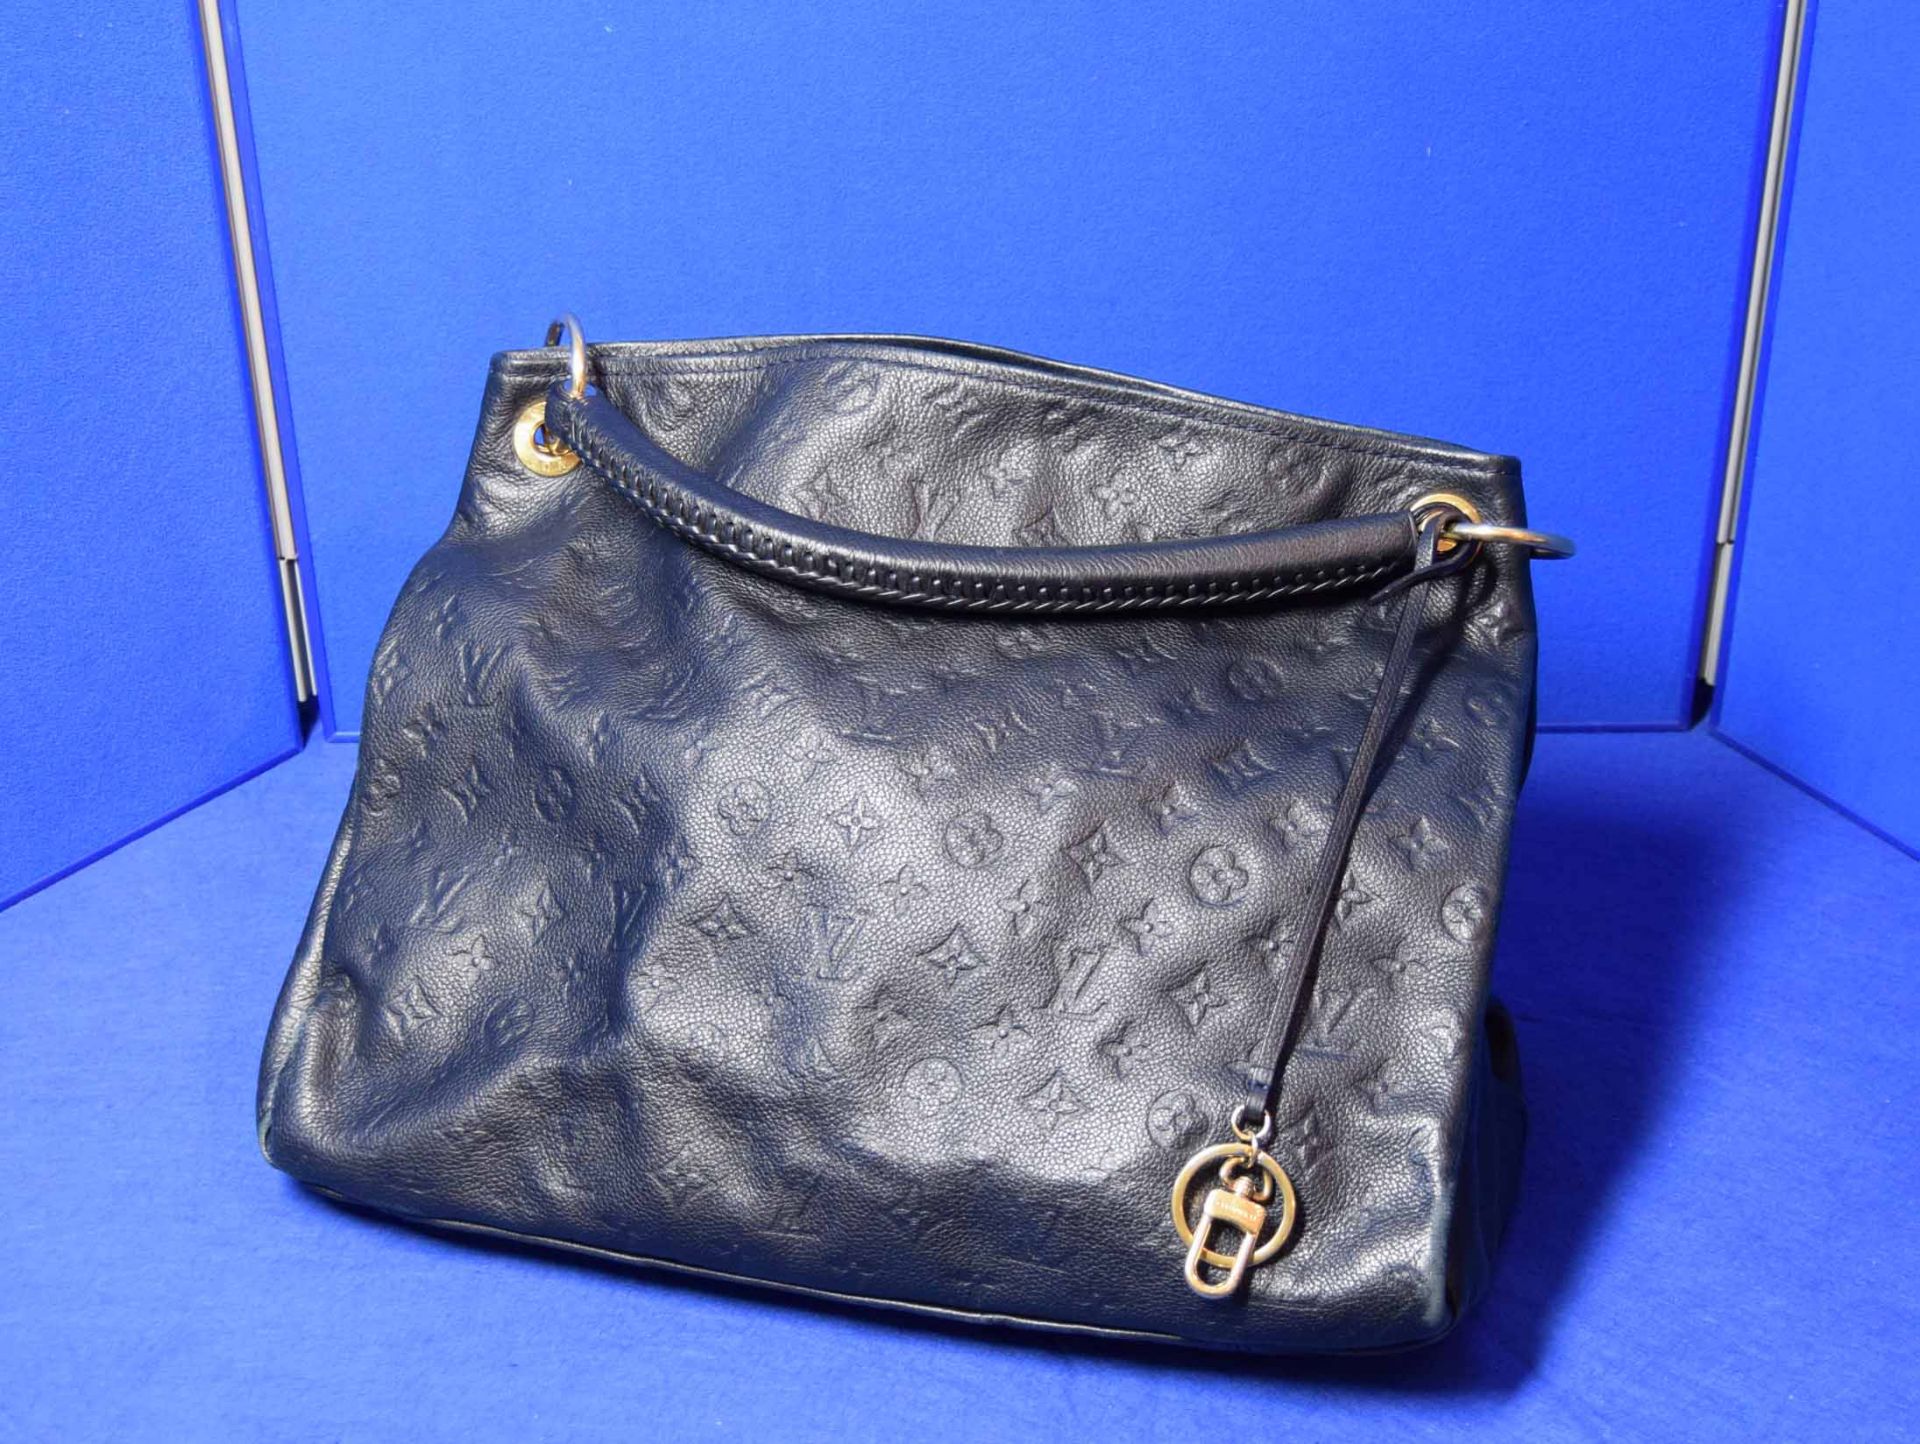 A LOUIS VUITTON Artsy Tote Bag in Navy Blue Imprinted Leather with embossed Logos. The open top - Image 2 of 11